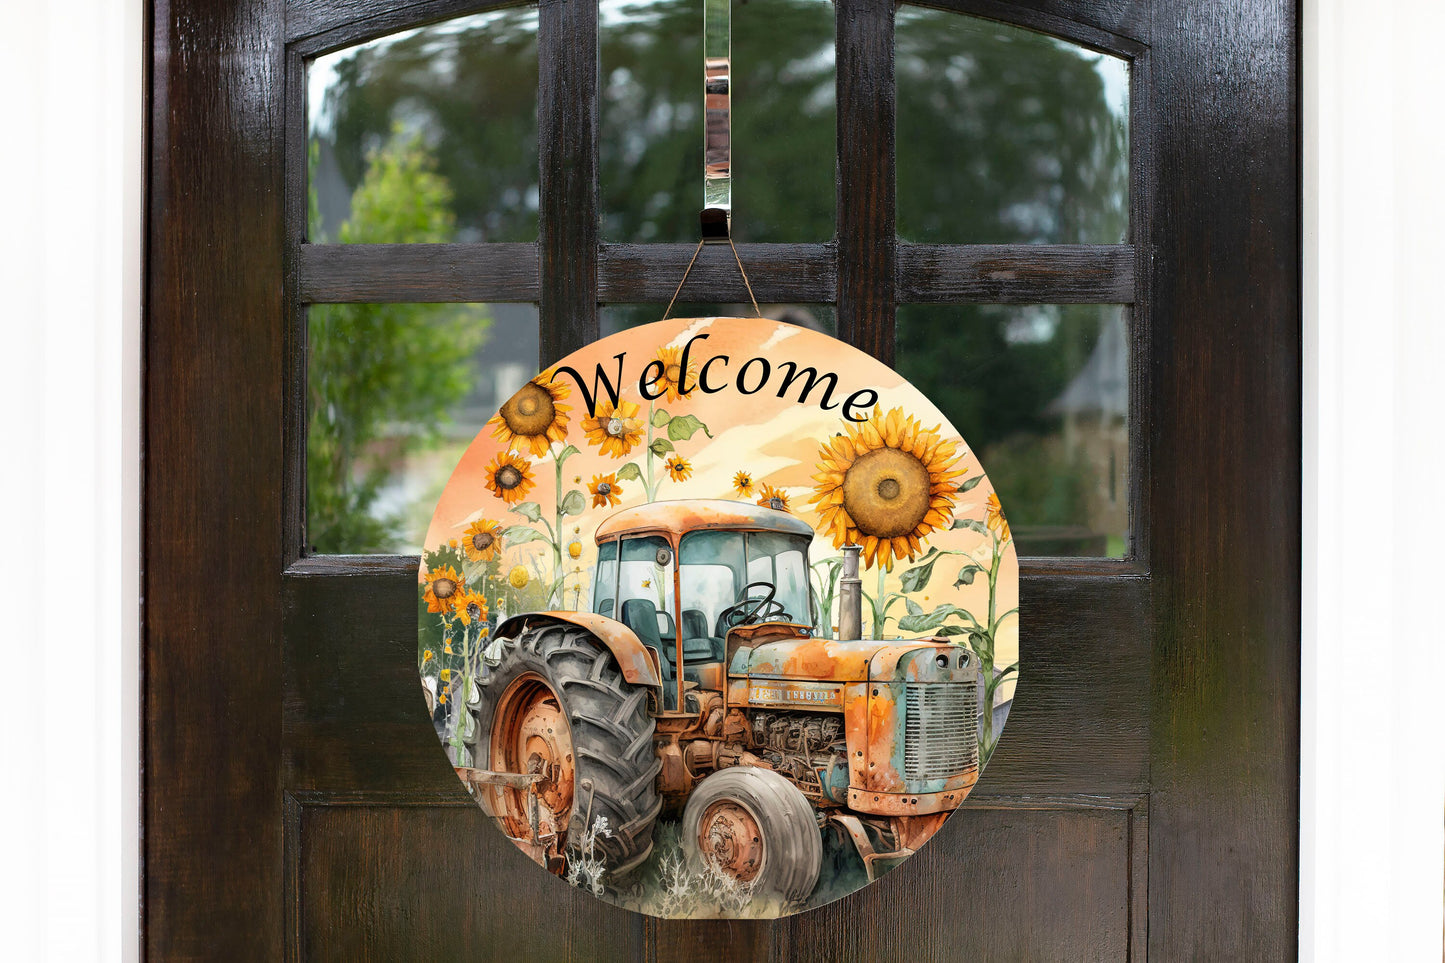 New Release Welcome Tractor and Sunflowers Sign, Farmhouse Round Wood Sign Farmhouse Door Hanger Wreath Sign